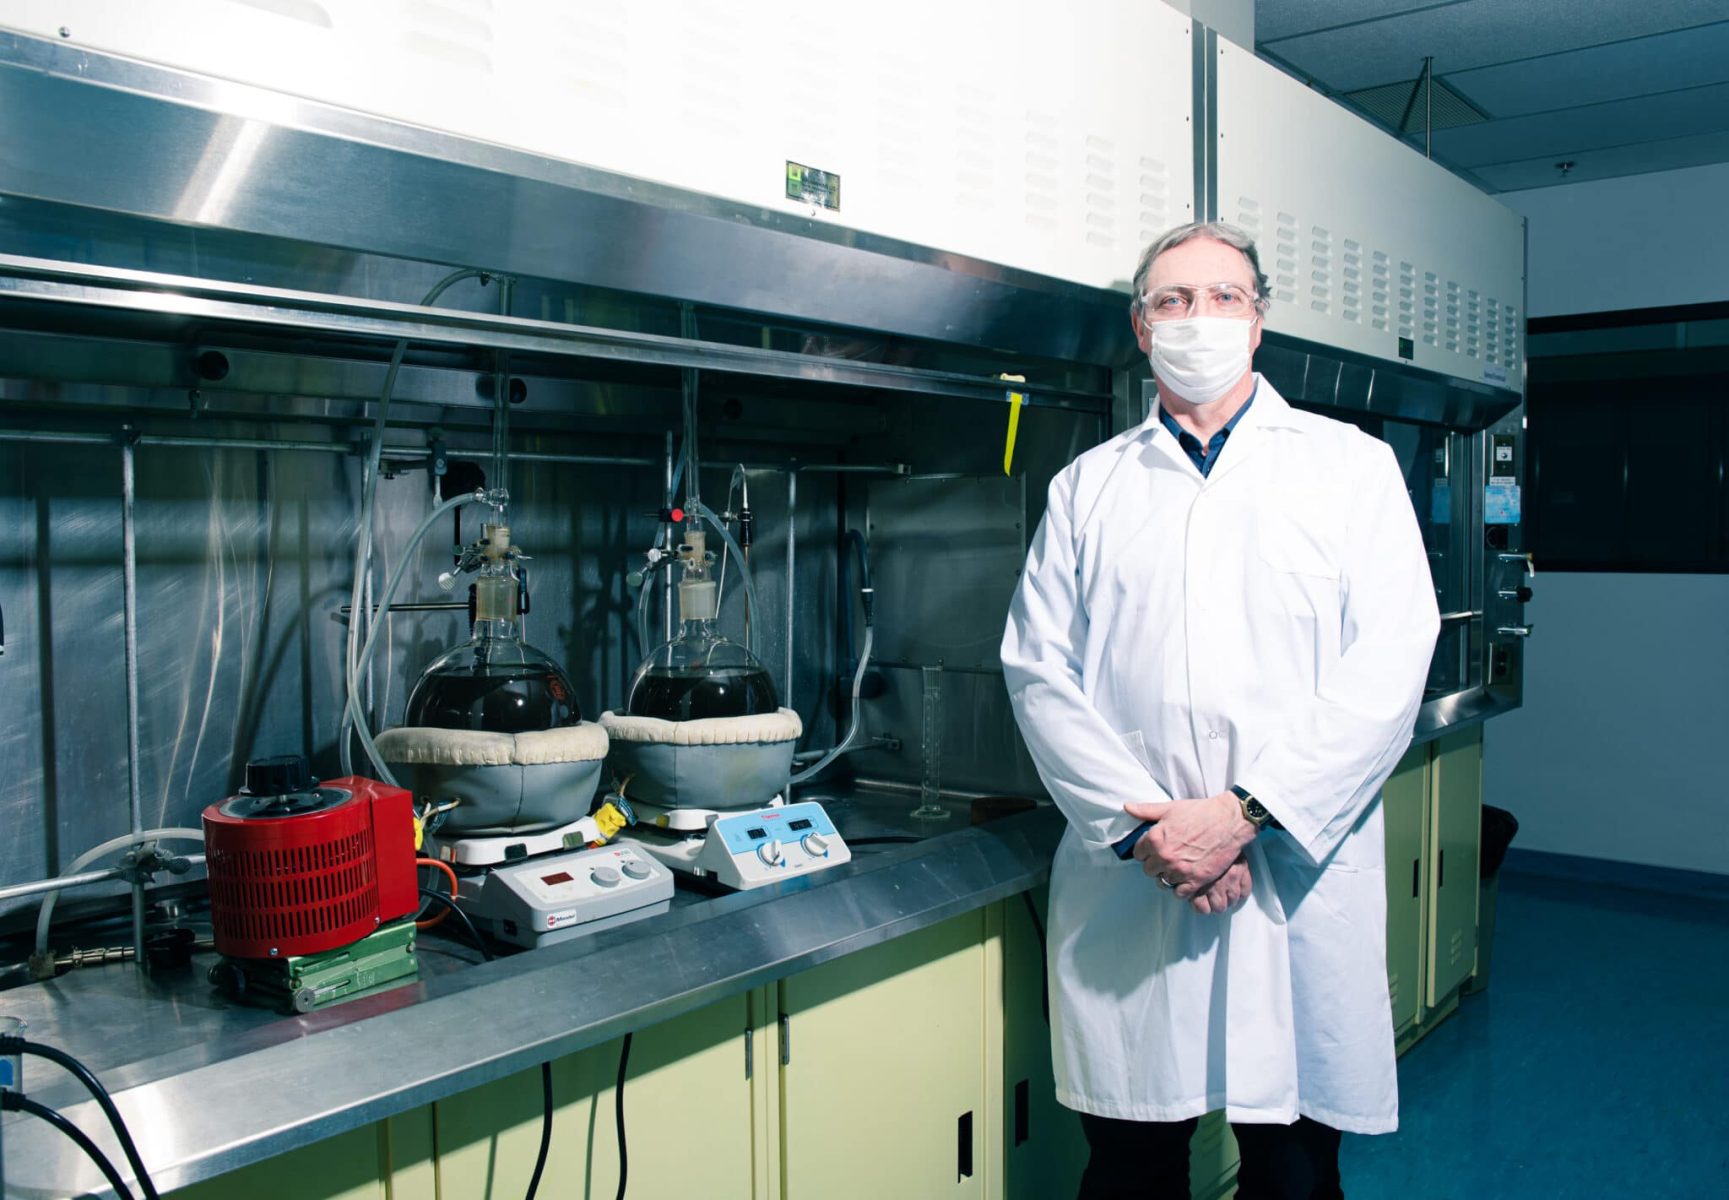 A man in a lab coat standing in front of equipment.